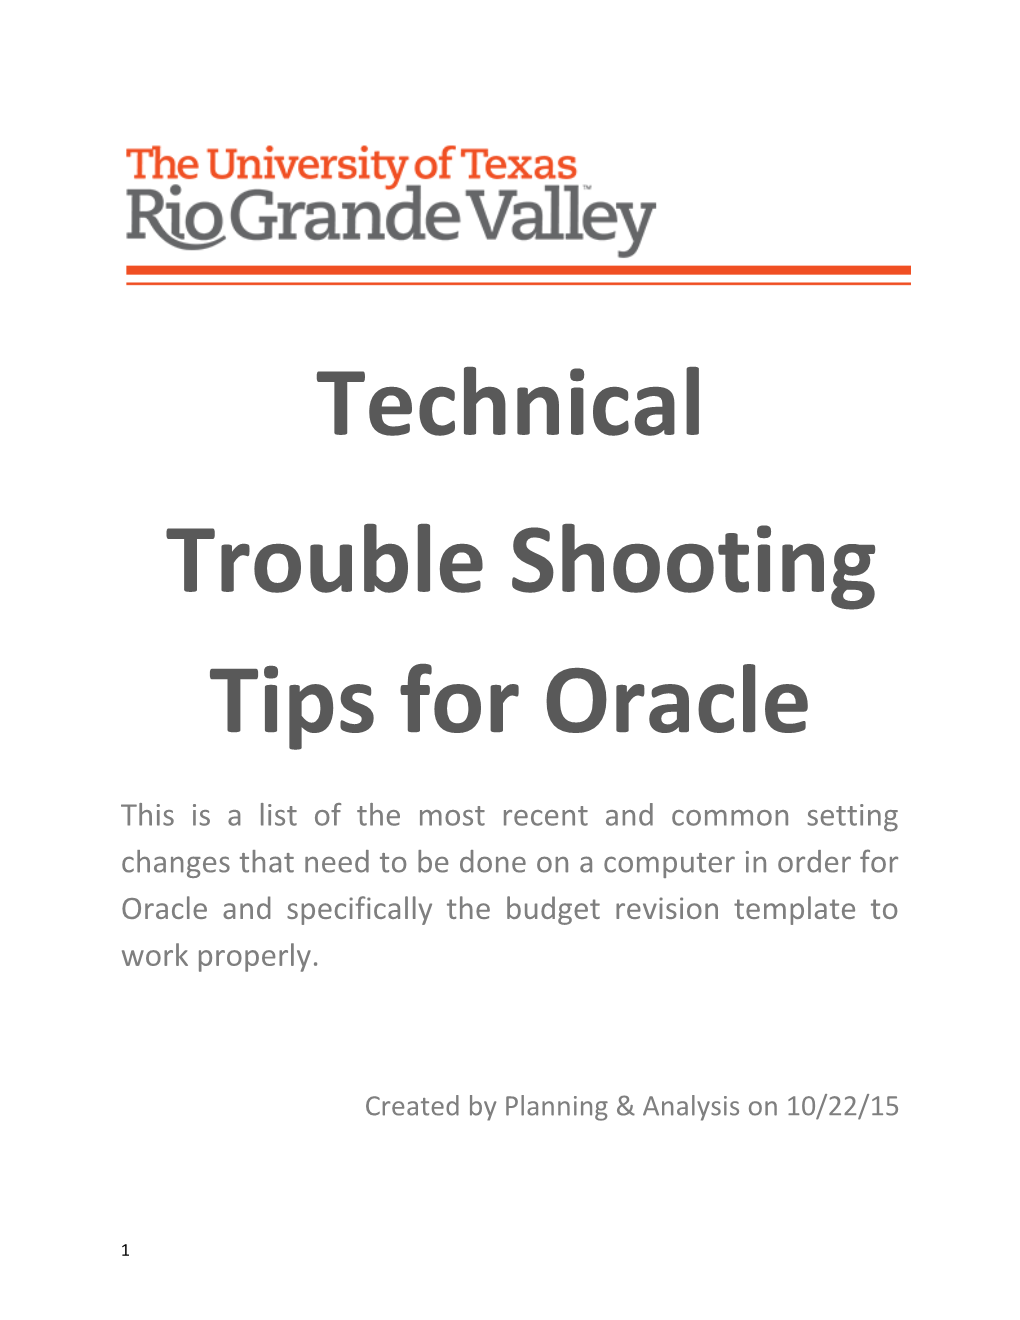 Technical Trouble Shooting Tips